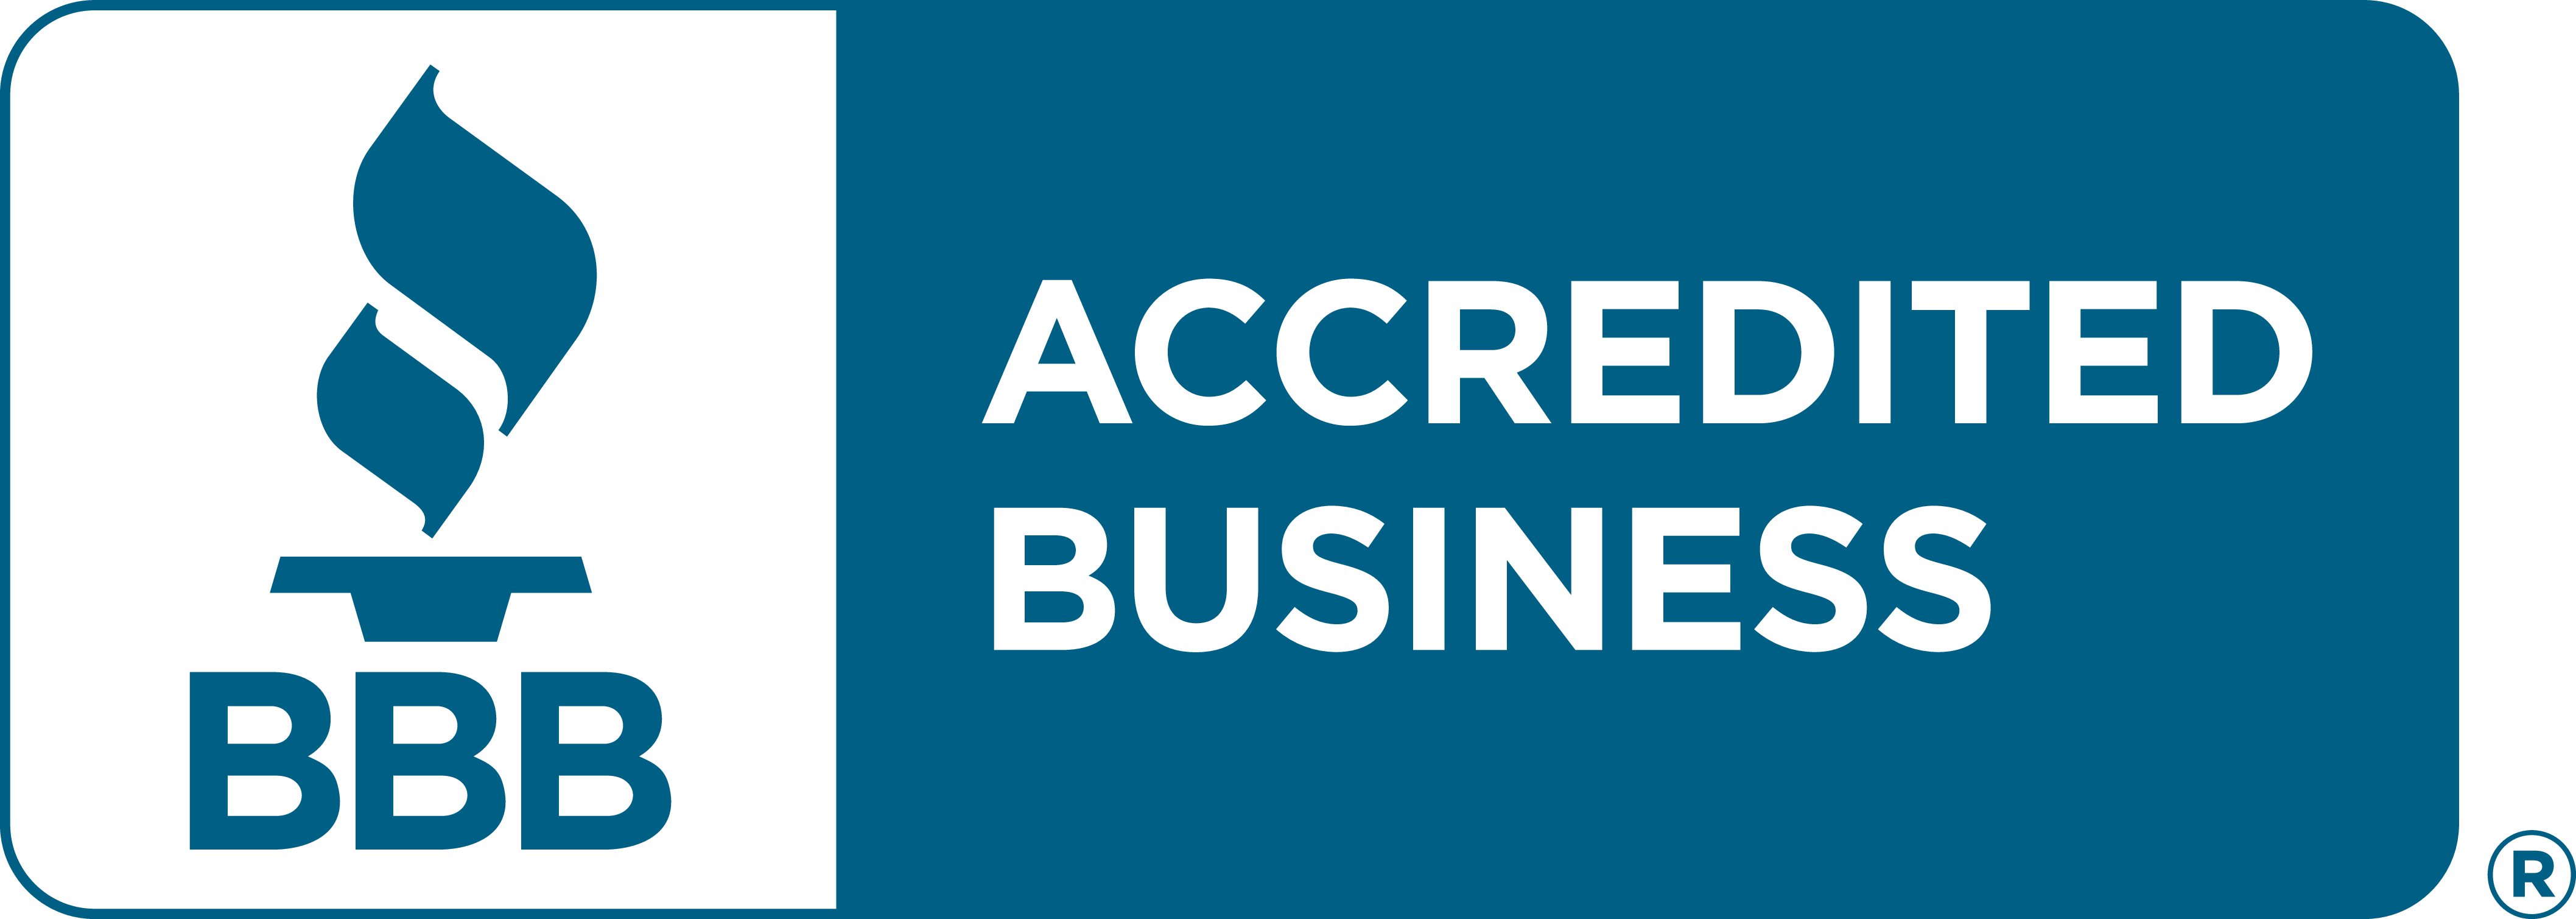 BBB accredited business Phoenix